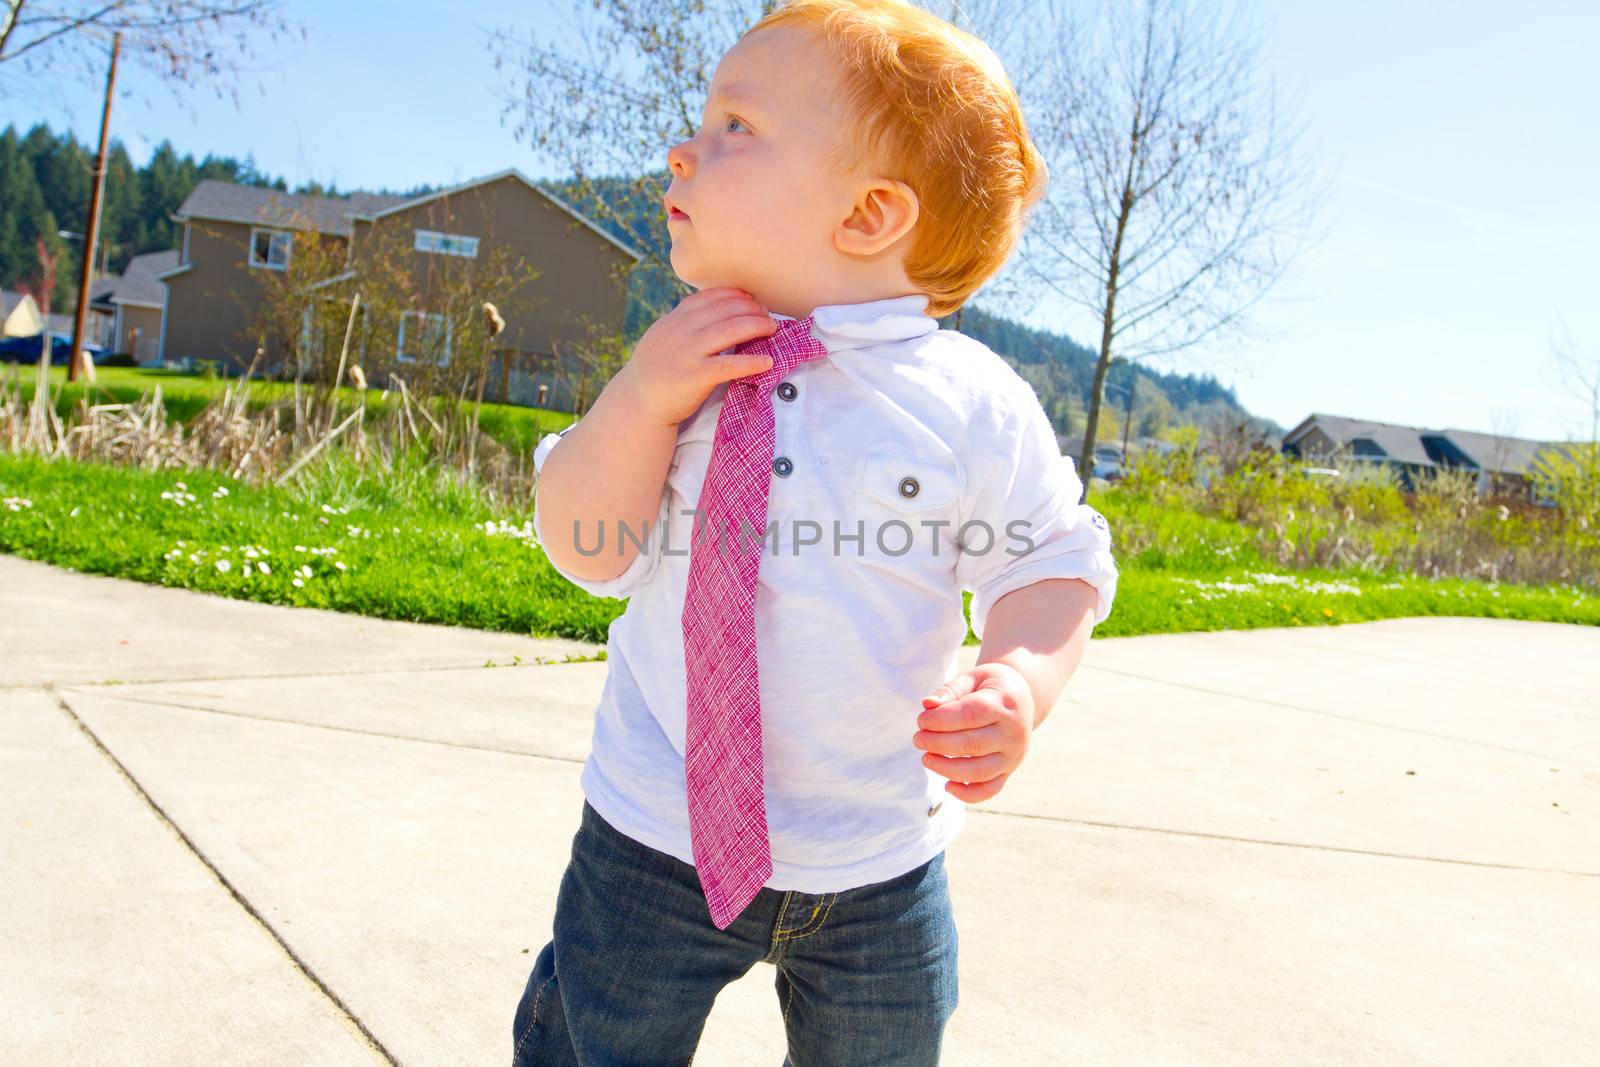 One Year Old Playing by joshuaraineyphotography